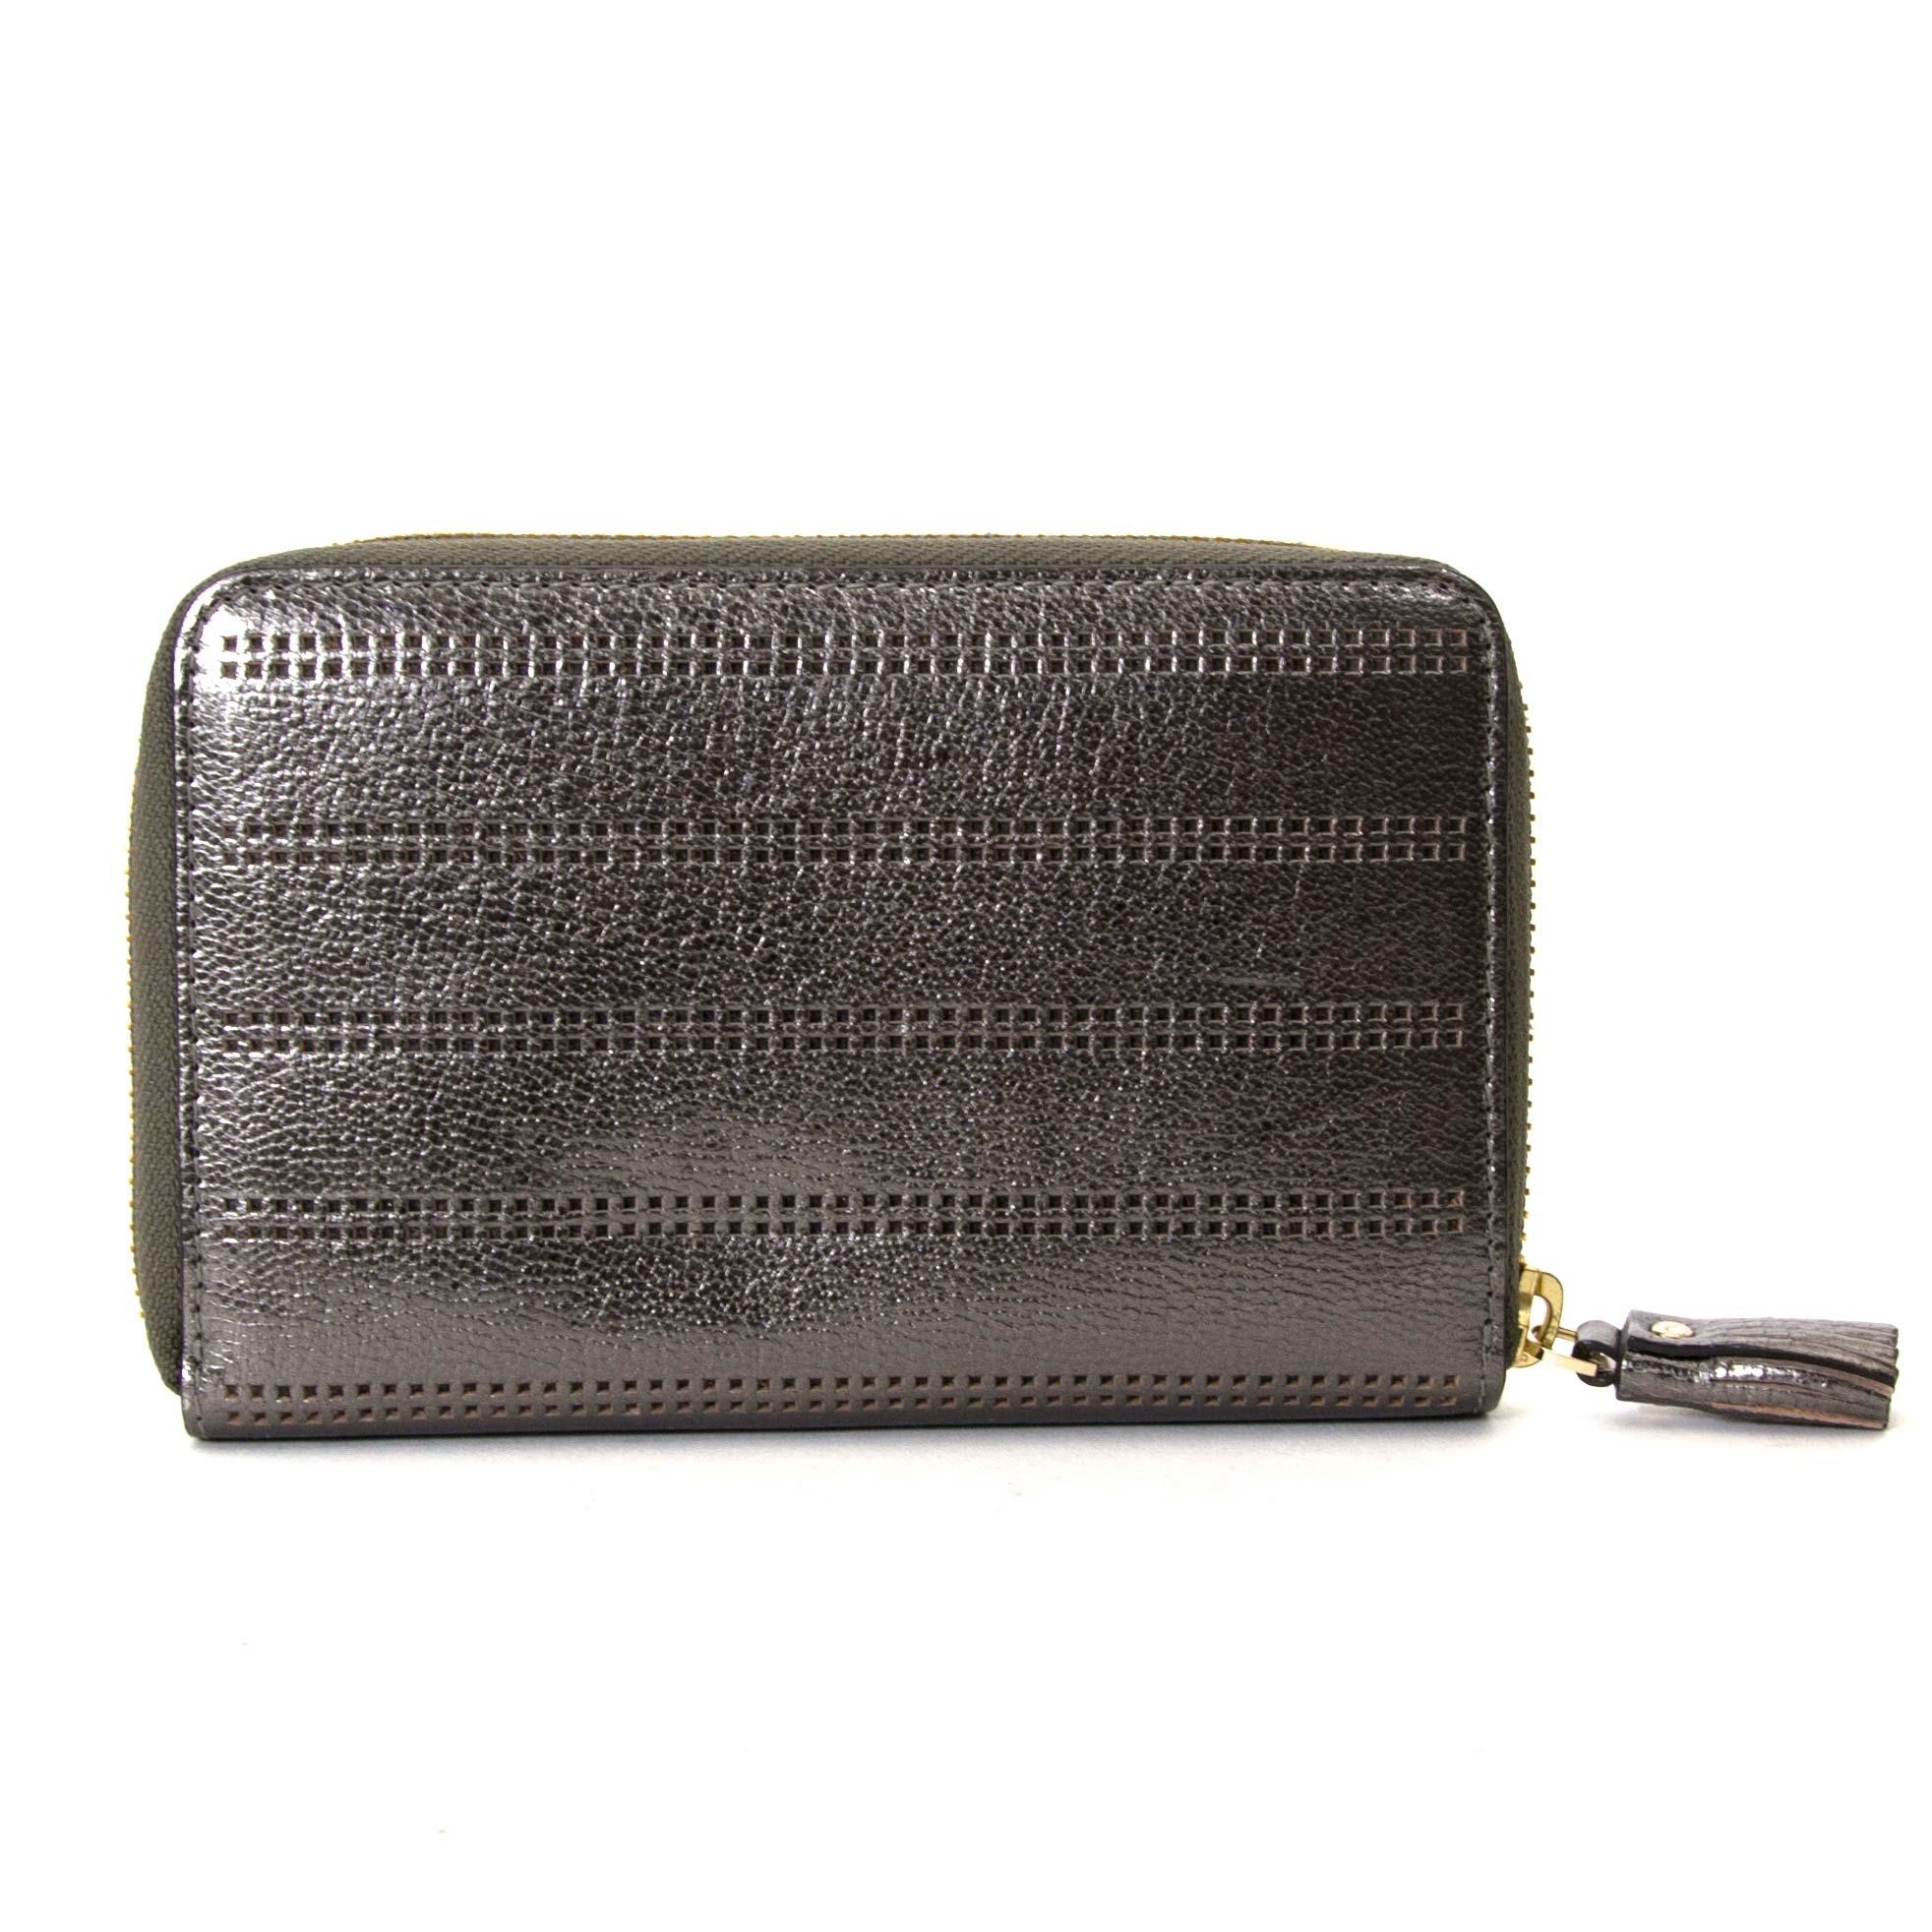 Anya Hindmarch Metallic Wallet  In Excellent Condition For Sale In Antwerp, BE